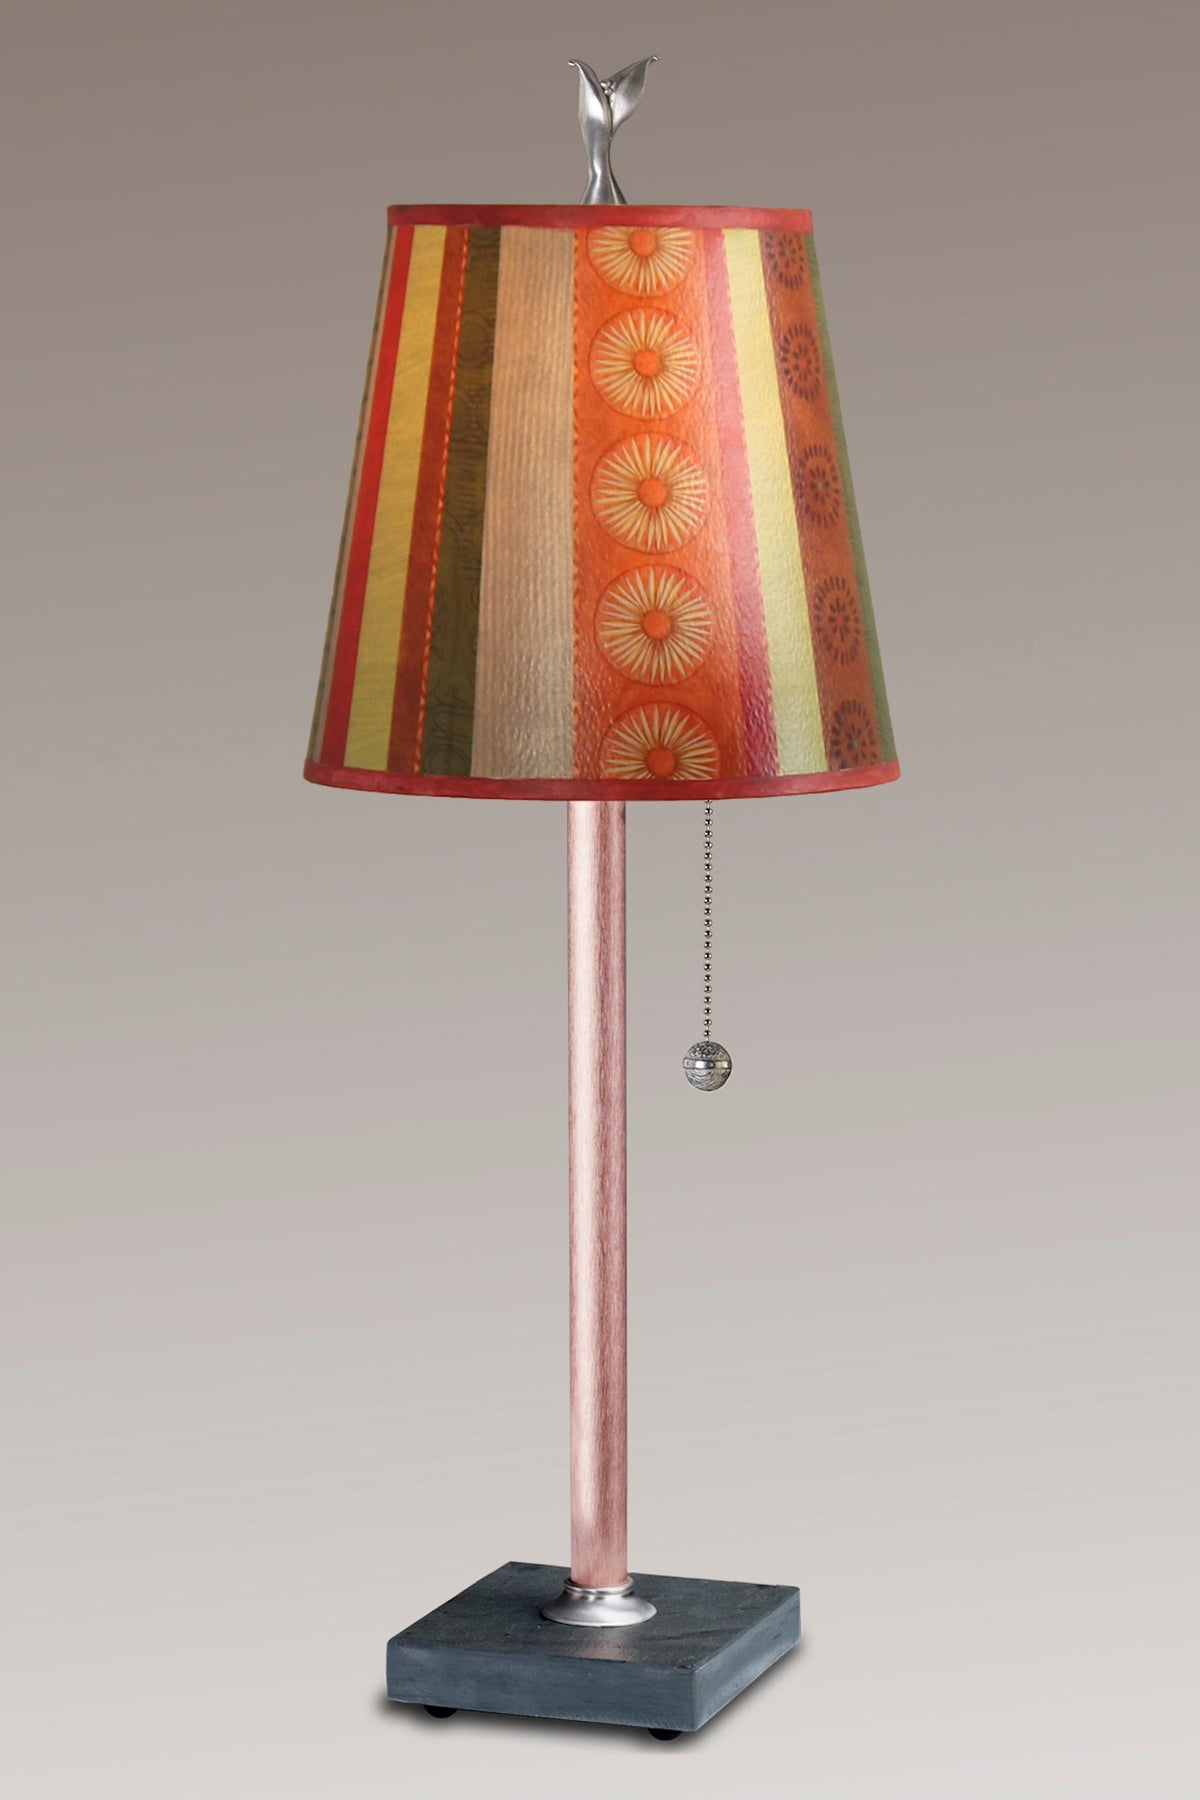 Copper Table Lamp with Small Drum Shade in Serape